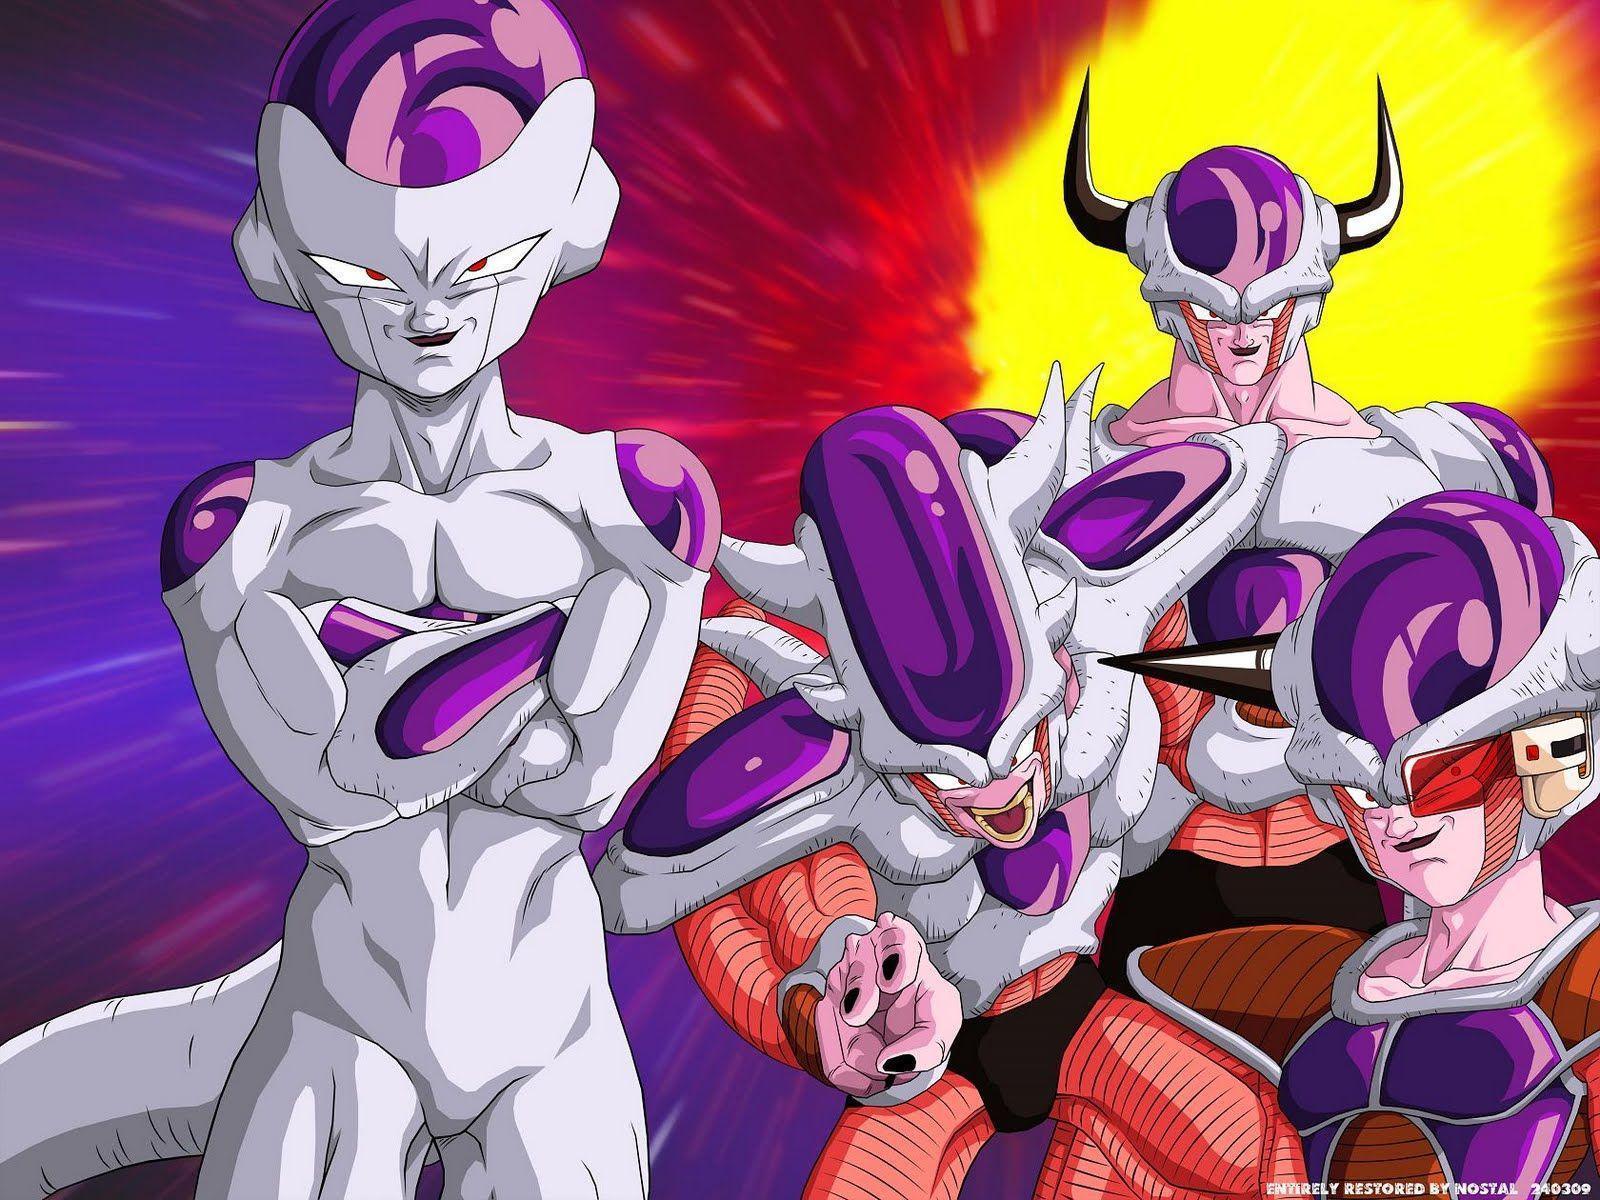 Best image about Frieza. Planets, Finals and Goku